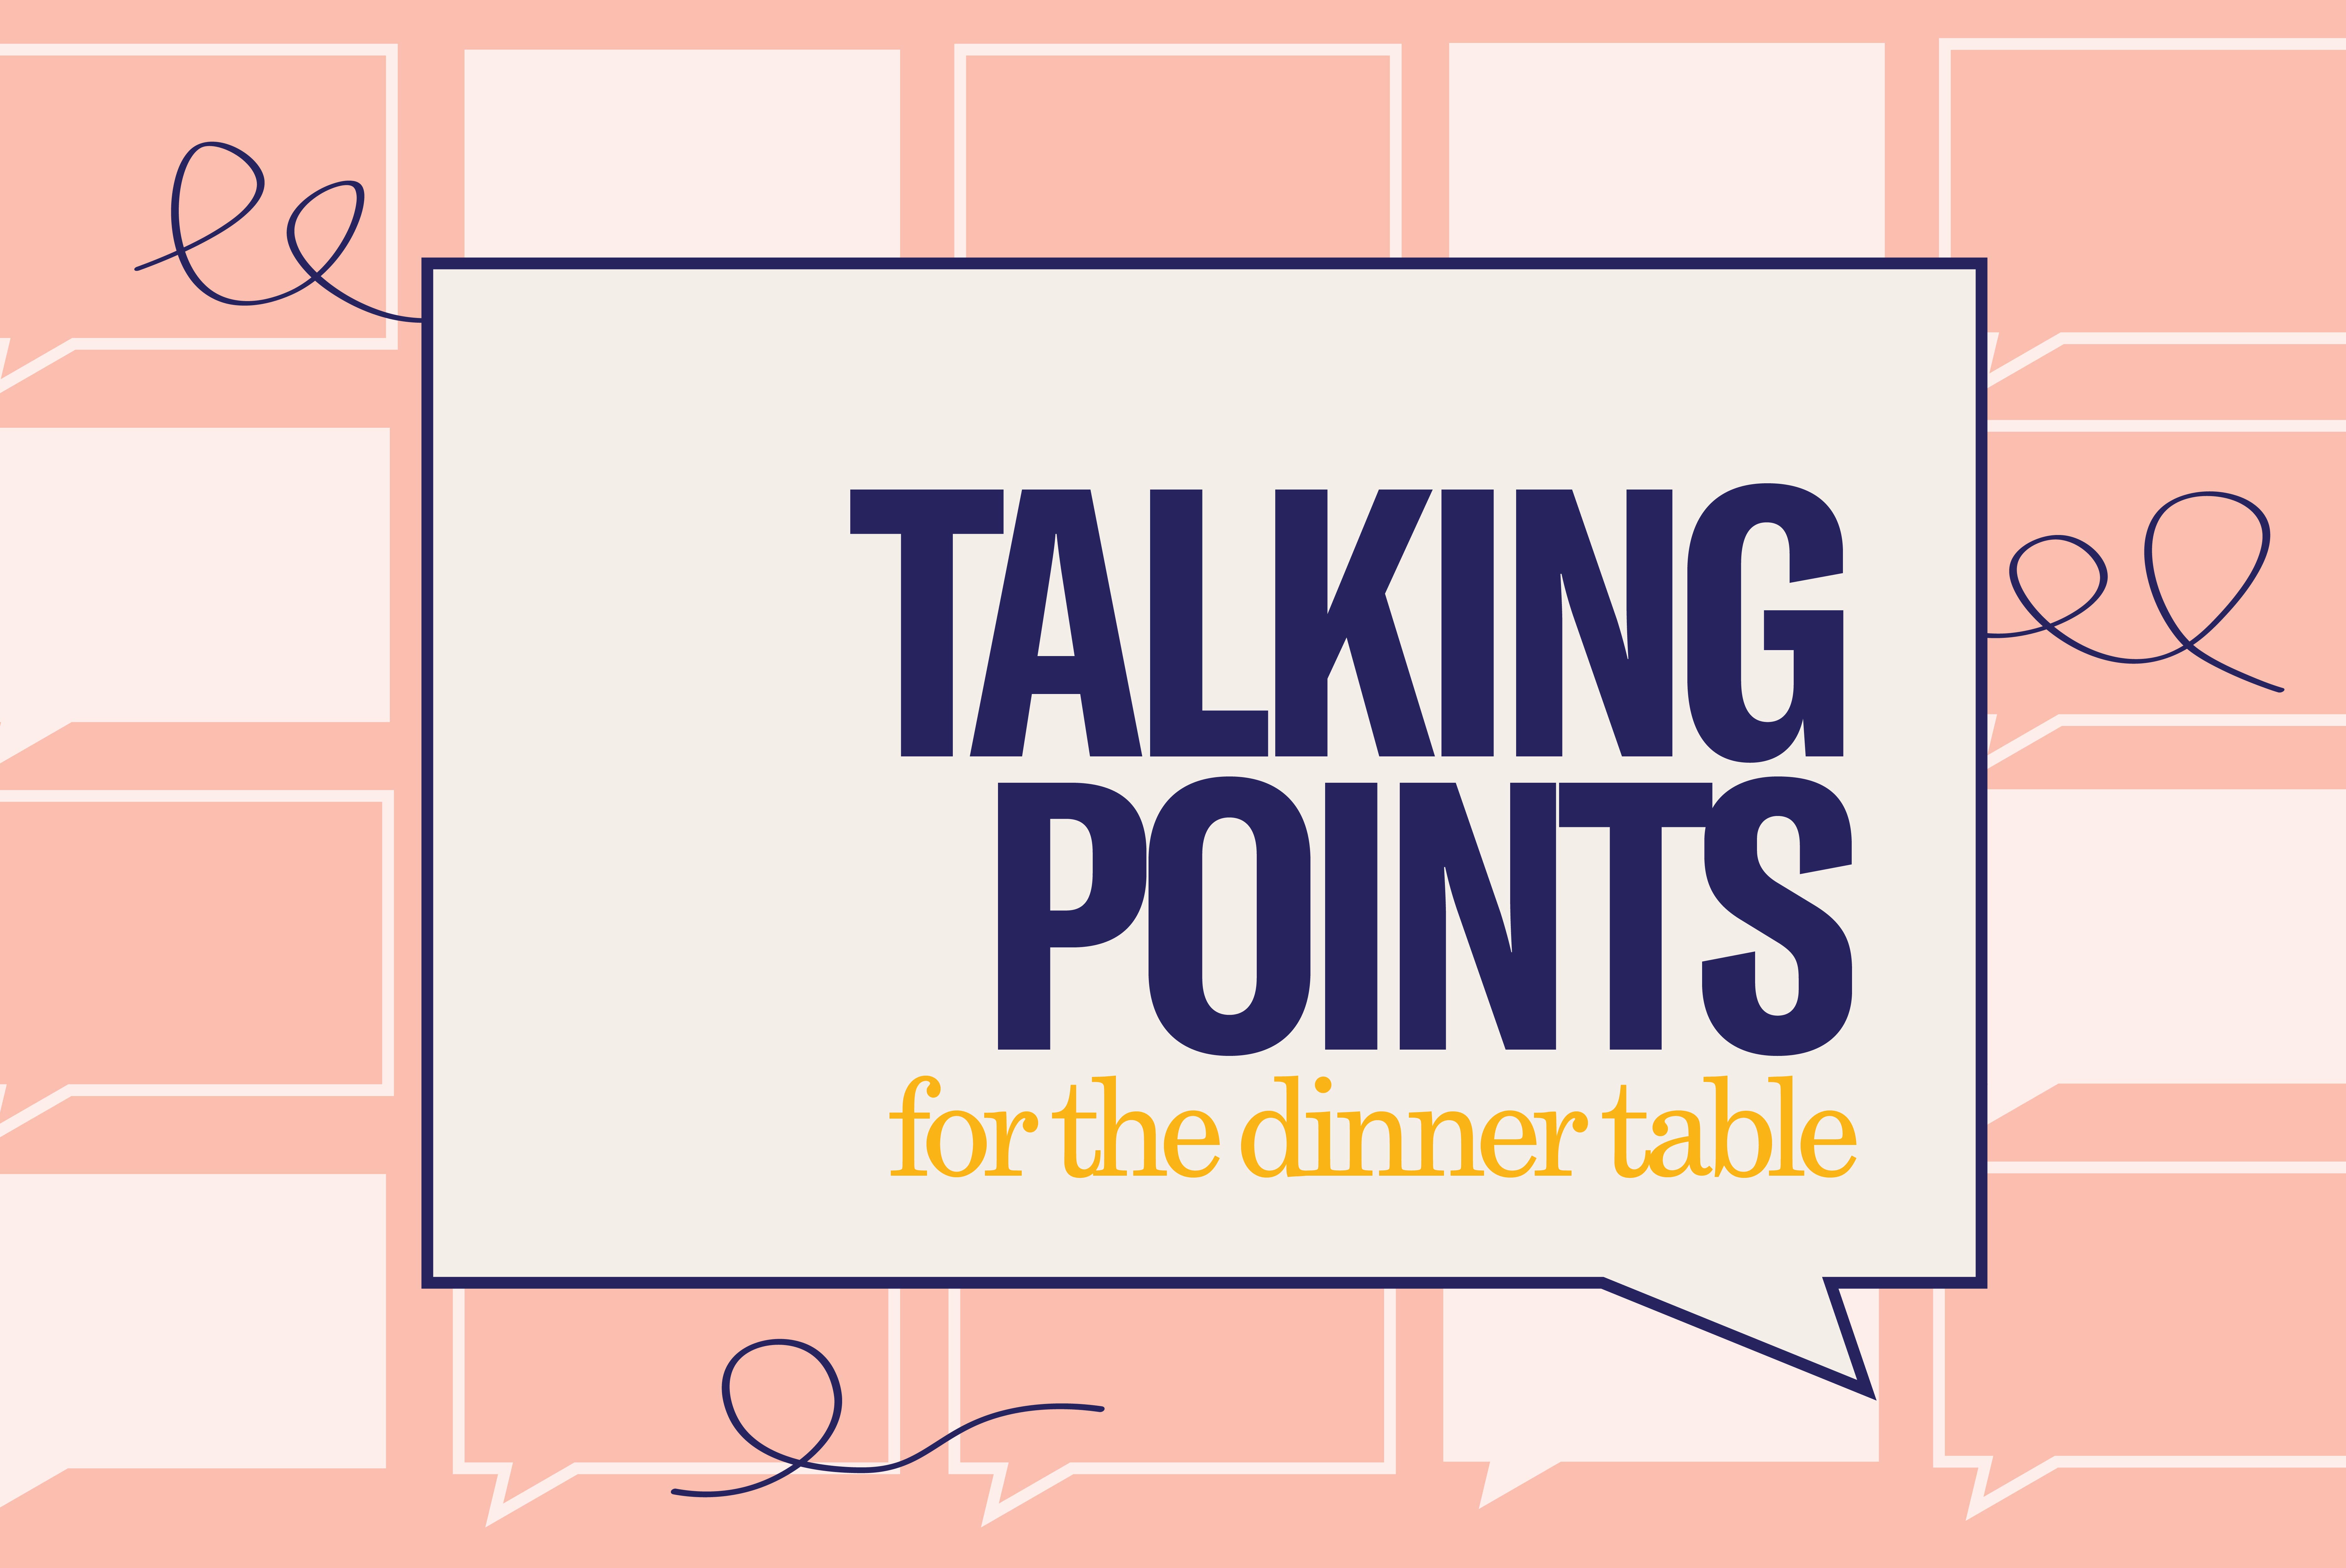 Pink background with talking bubbles. Large off white talking bubble in the center with text "Talking Points for the dinner table"